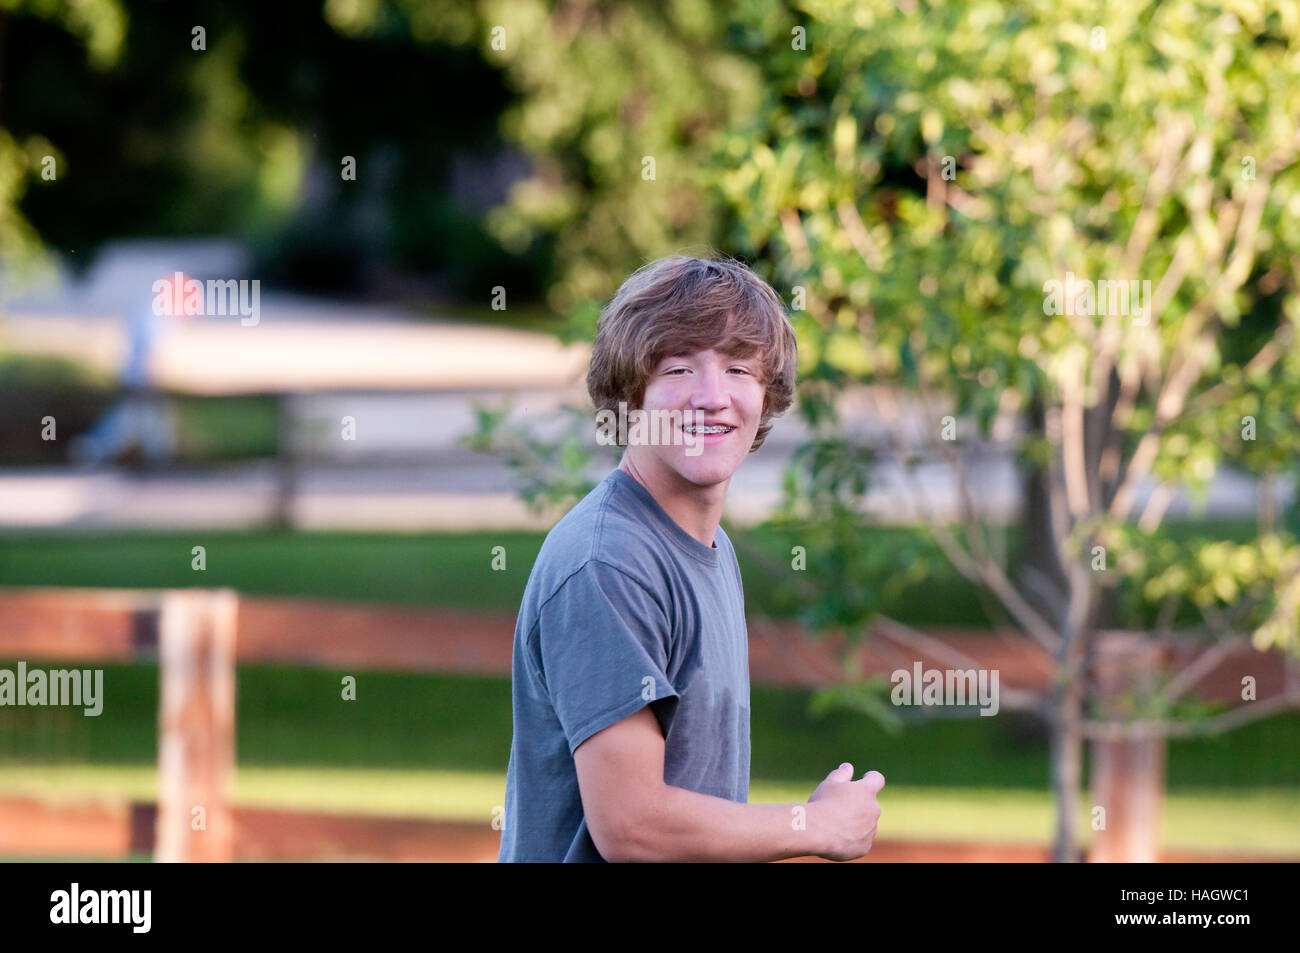 Handsome teen boy with braces and smile on face playing outdoors. Stock Photo